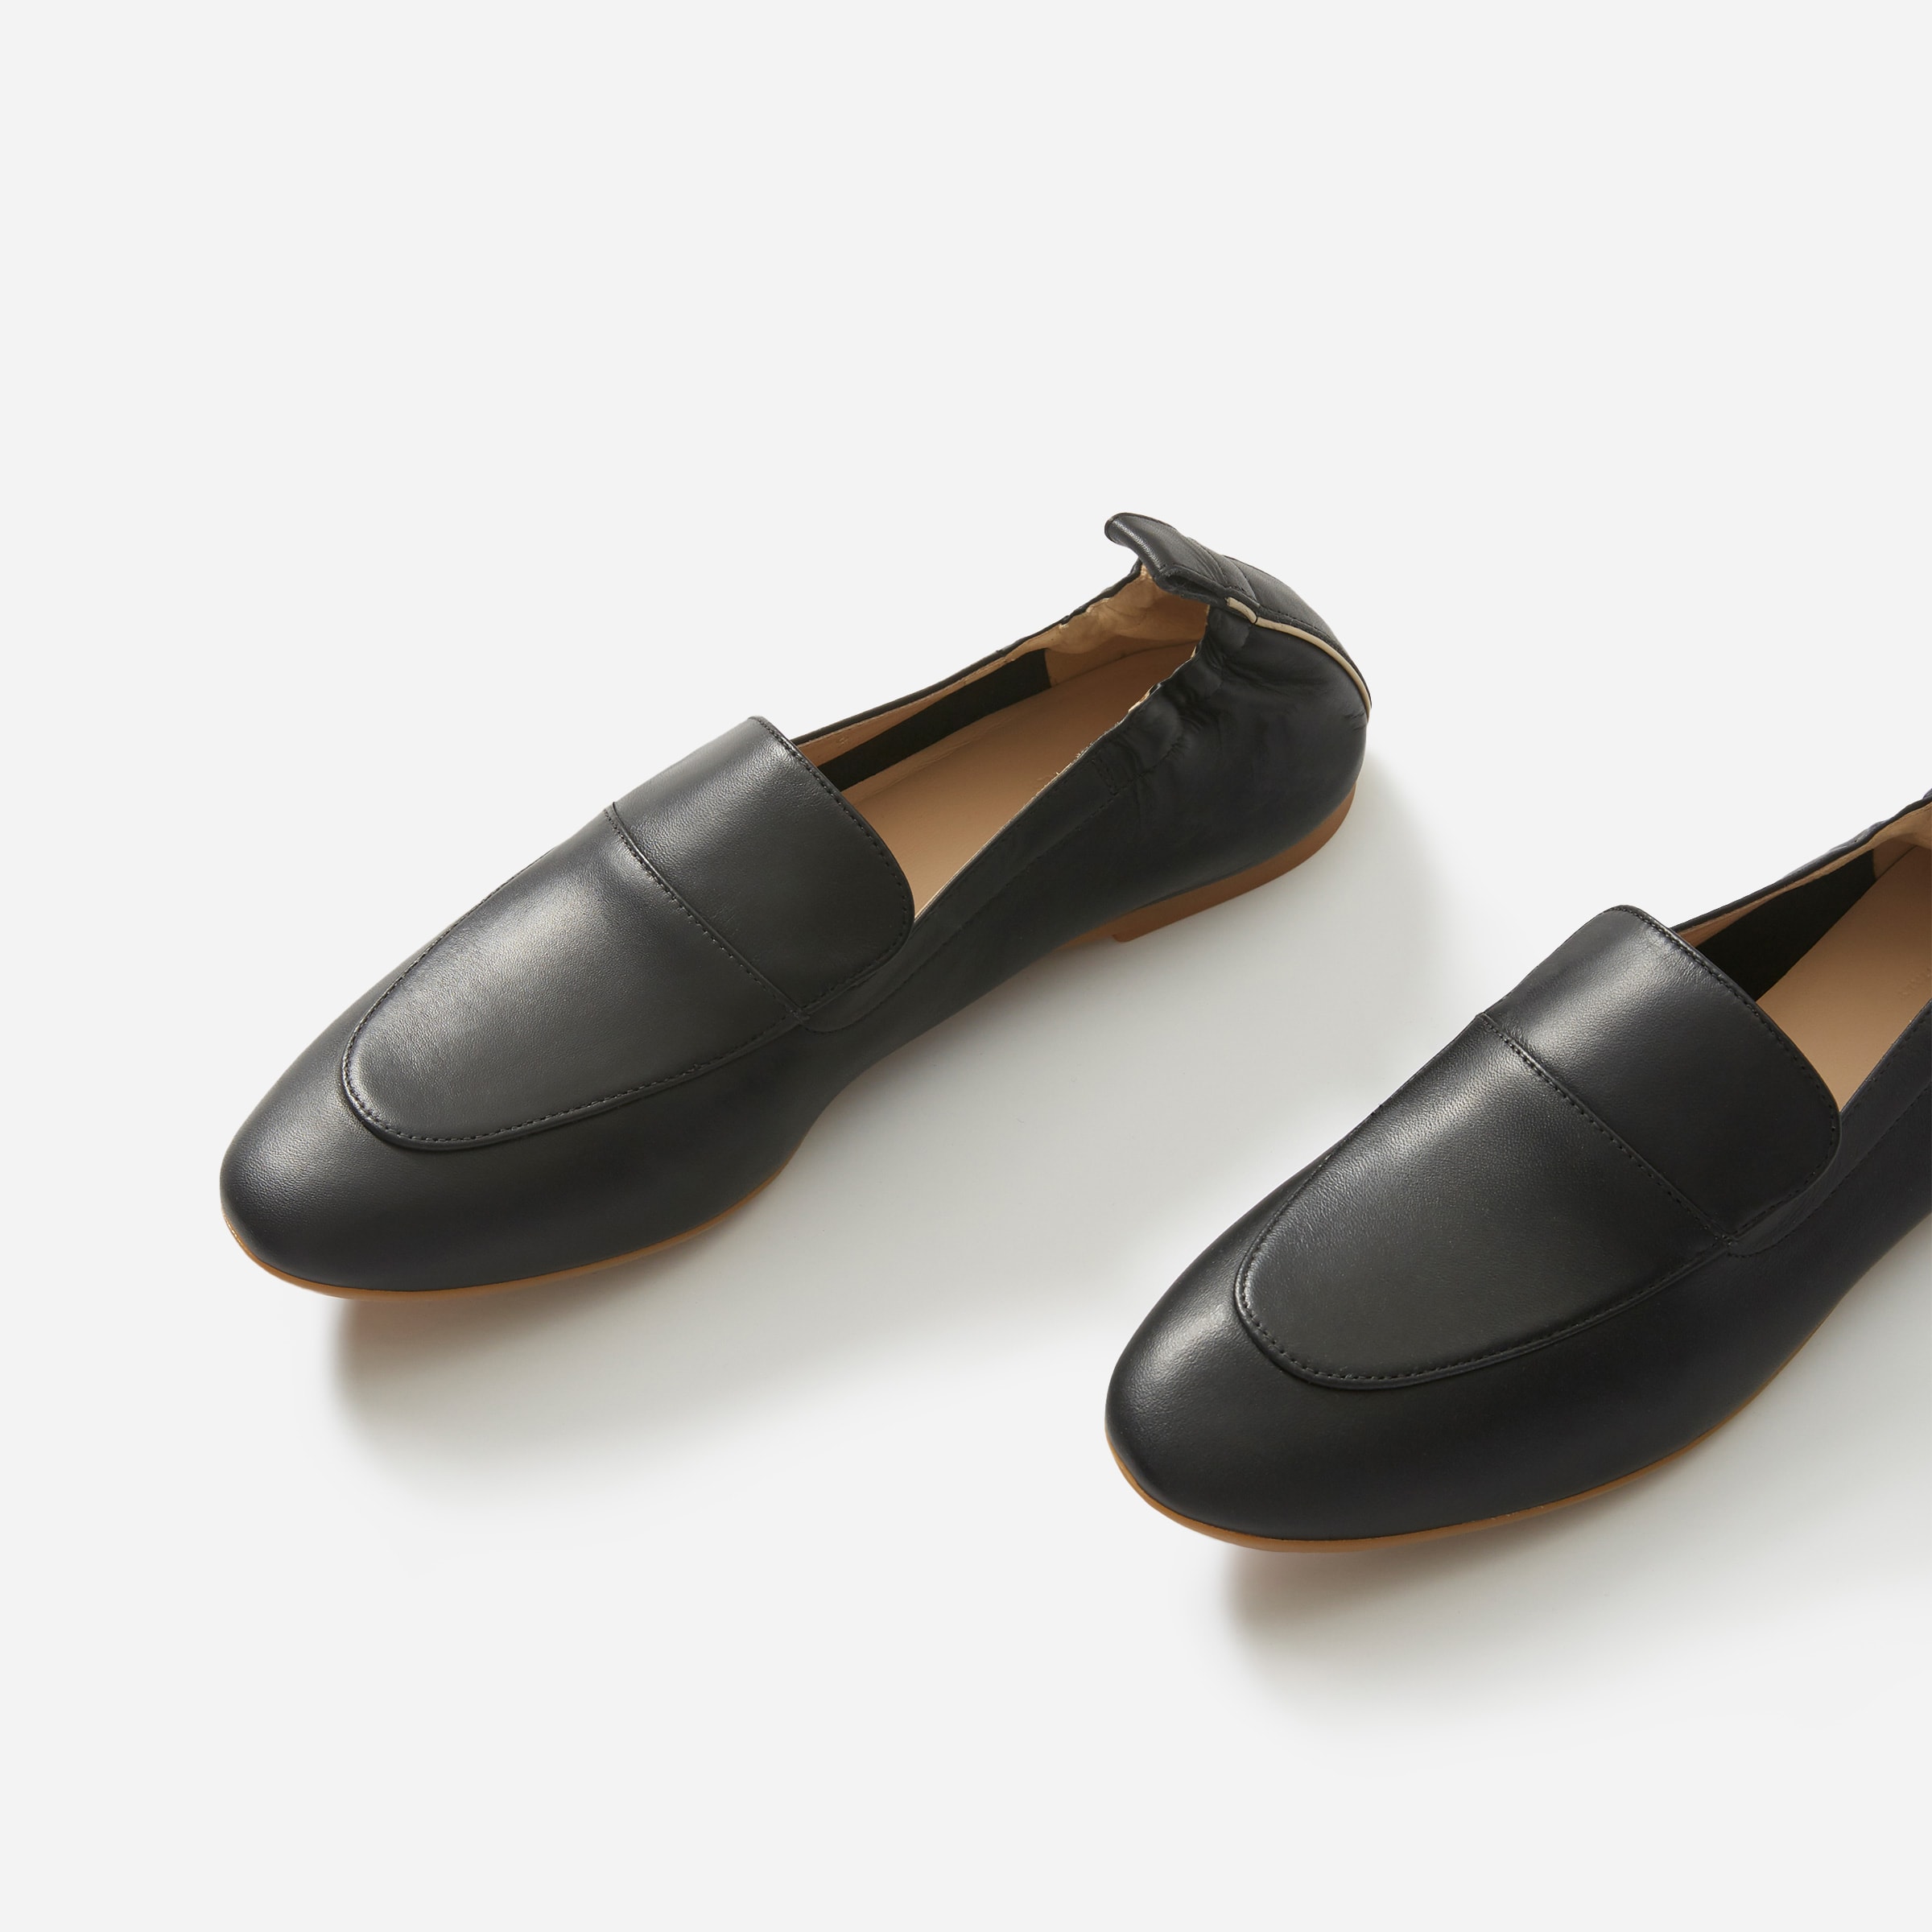 The Day Loafer – Everlane